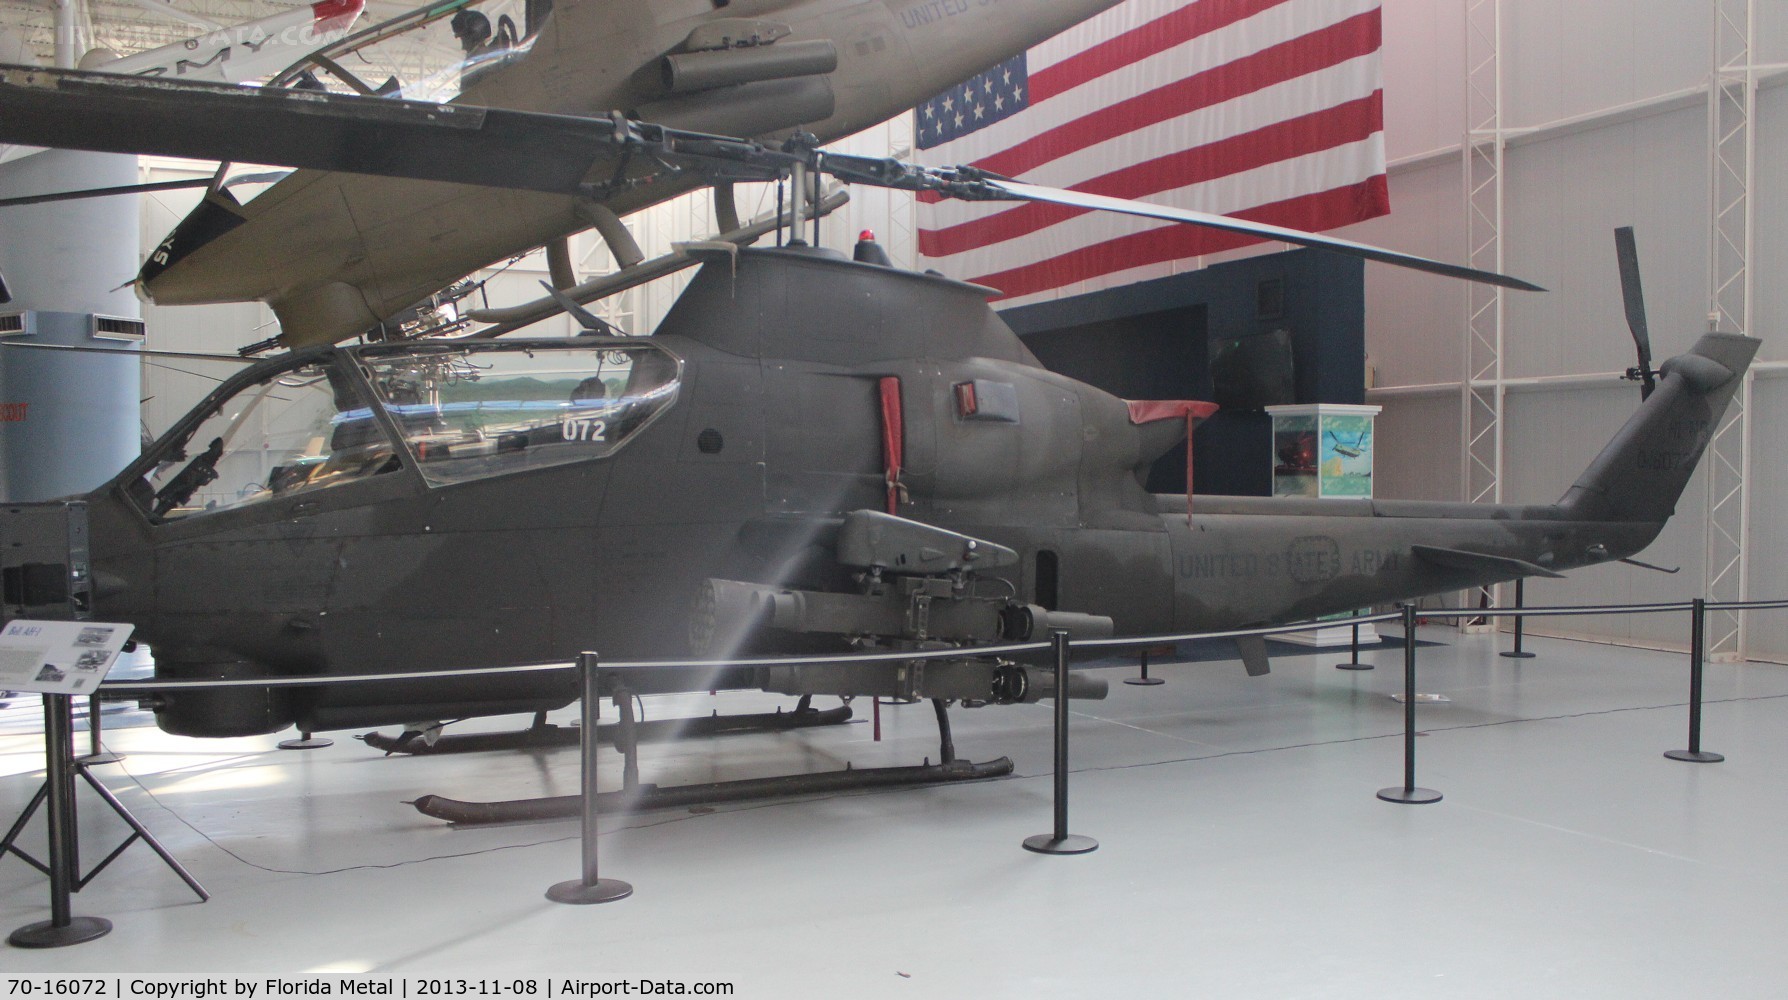 70-16072, 1970 Bell AH-1S Cobra C/N 21016, AH-1S at the Army Aviation Museum